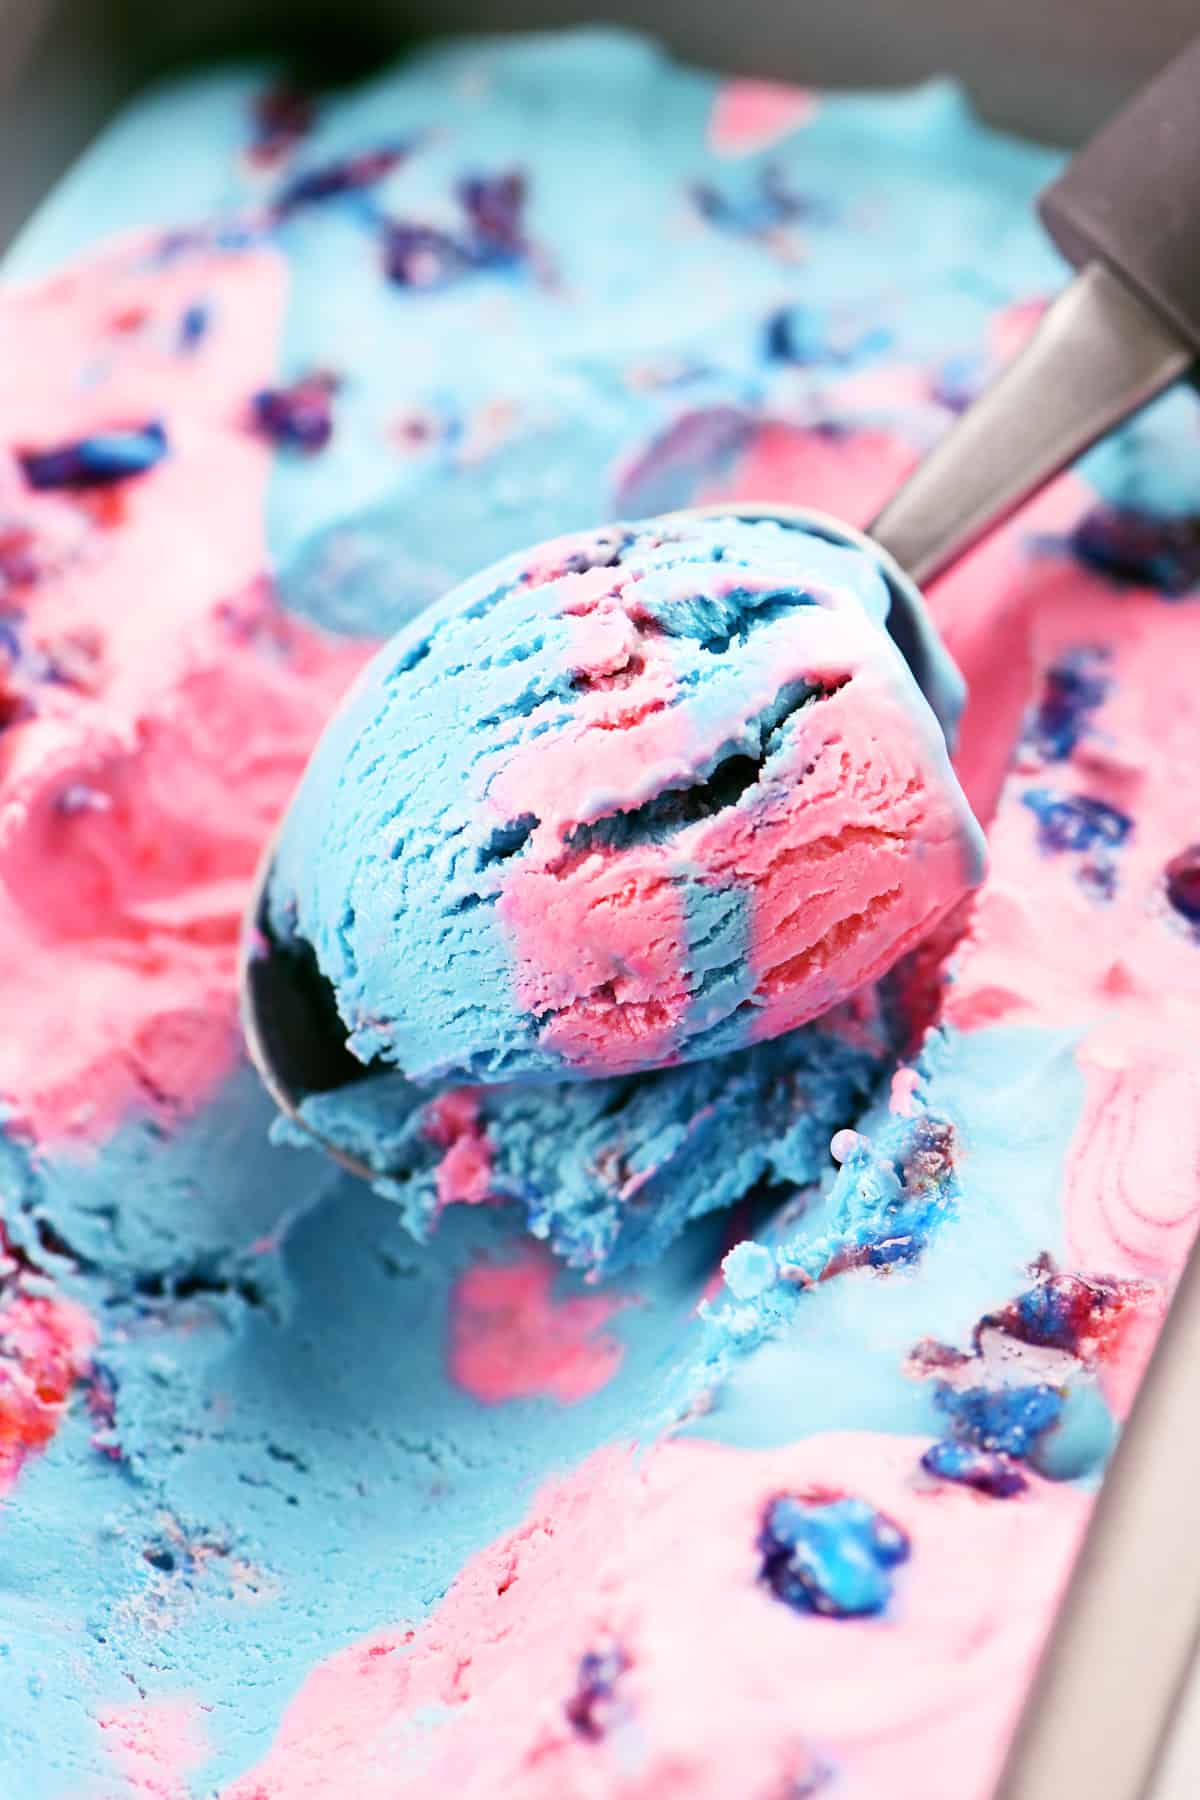 An ice cream scooper is scooping pink and blue ice cream from a loaf pan.